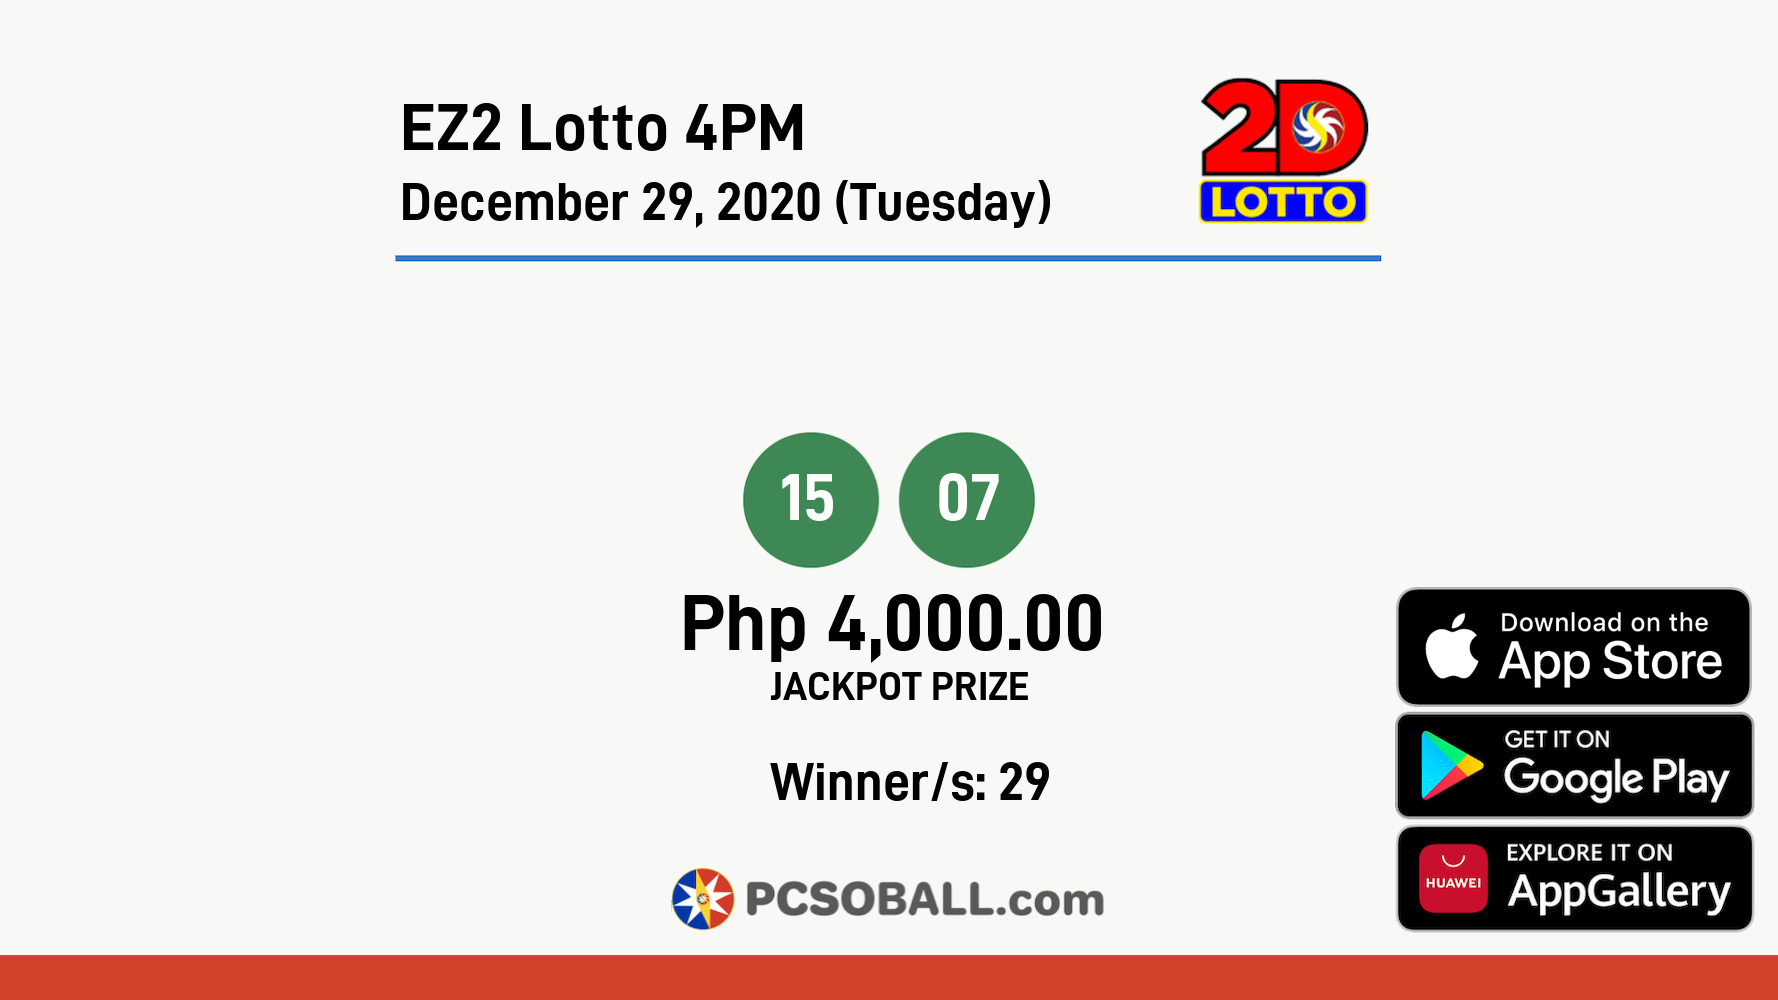 EZ2 Lotto 4PM December 29, 2020 (Tuesday) Result